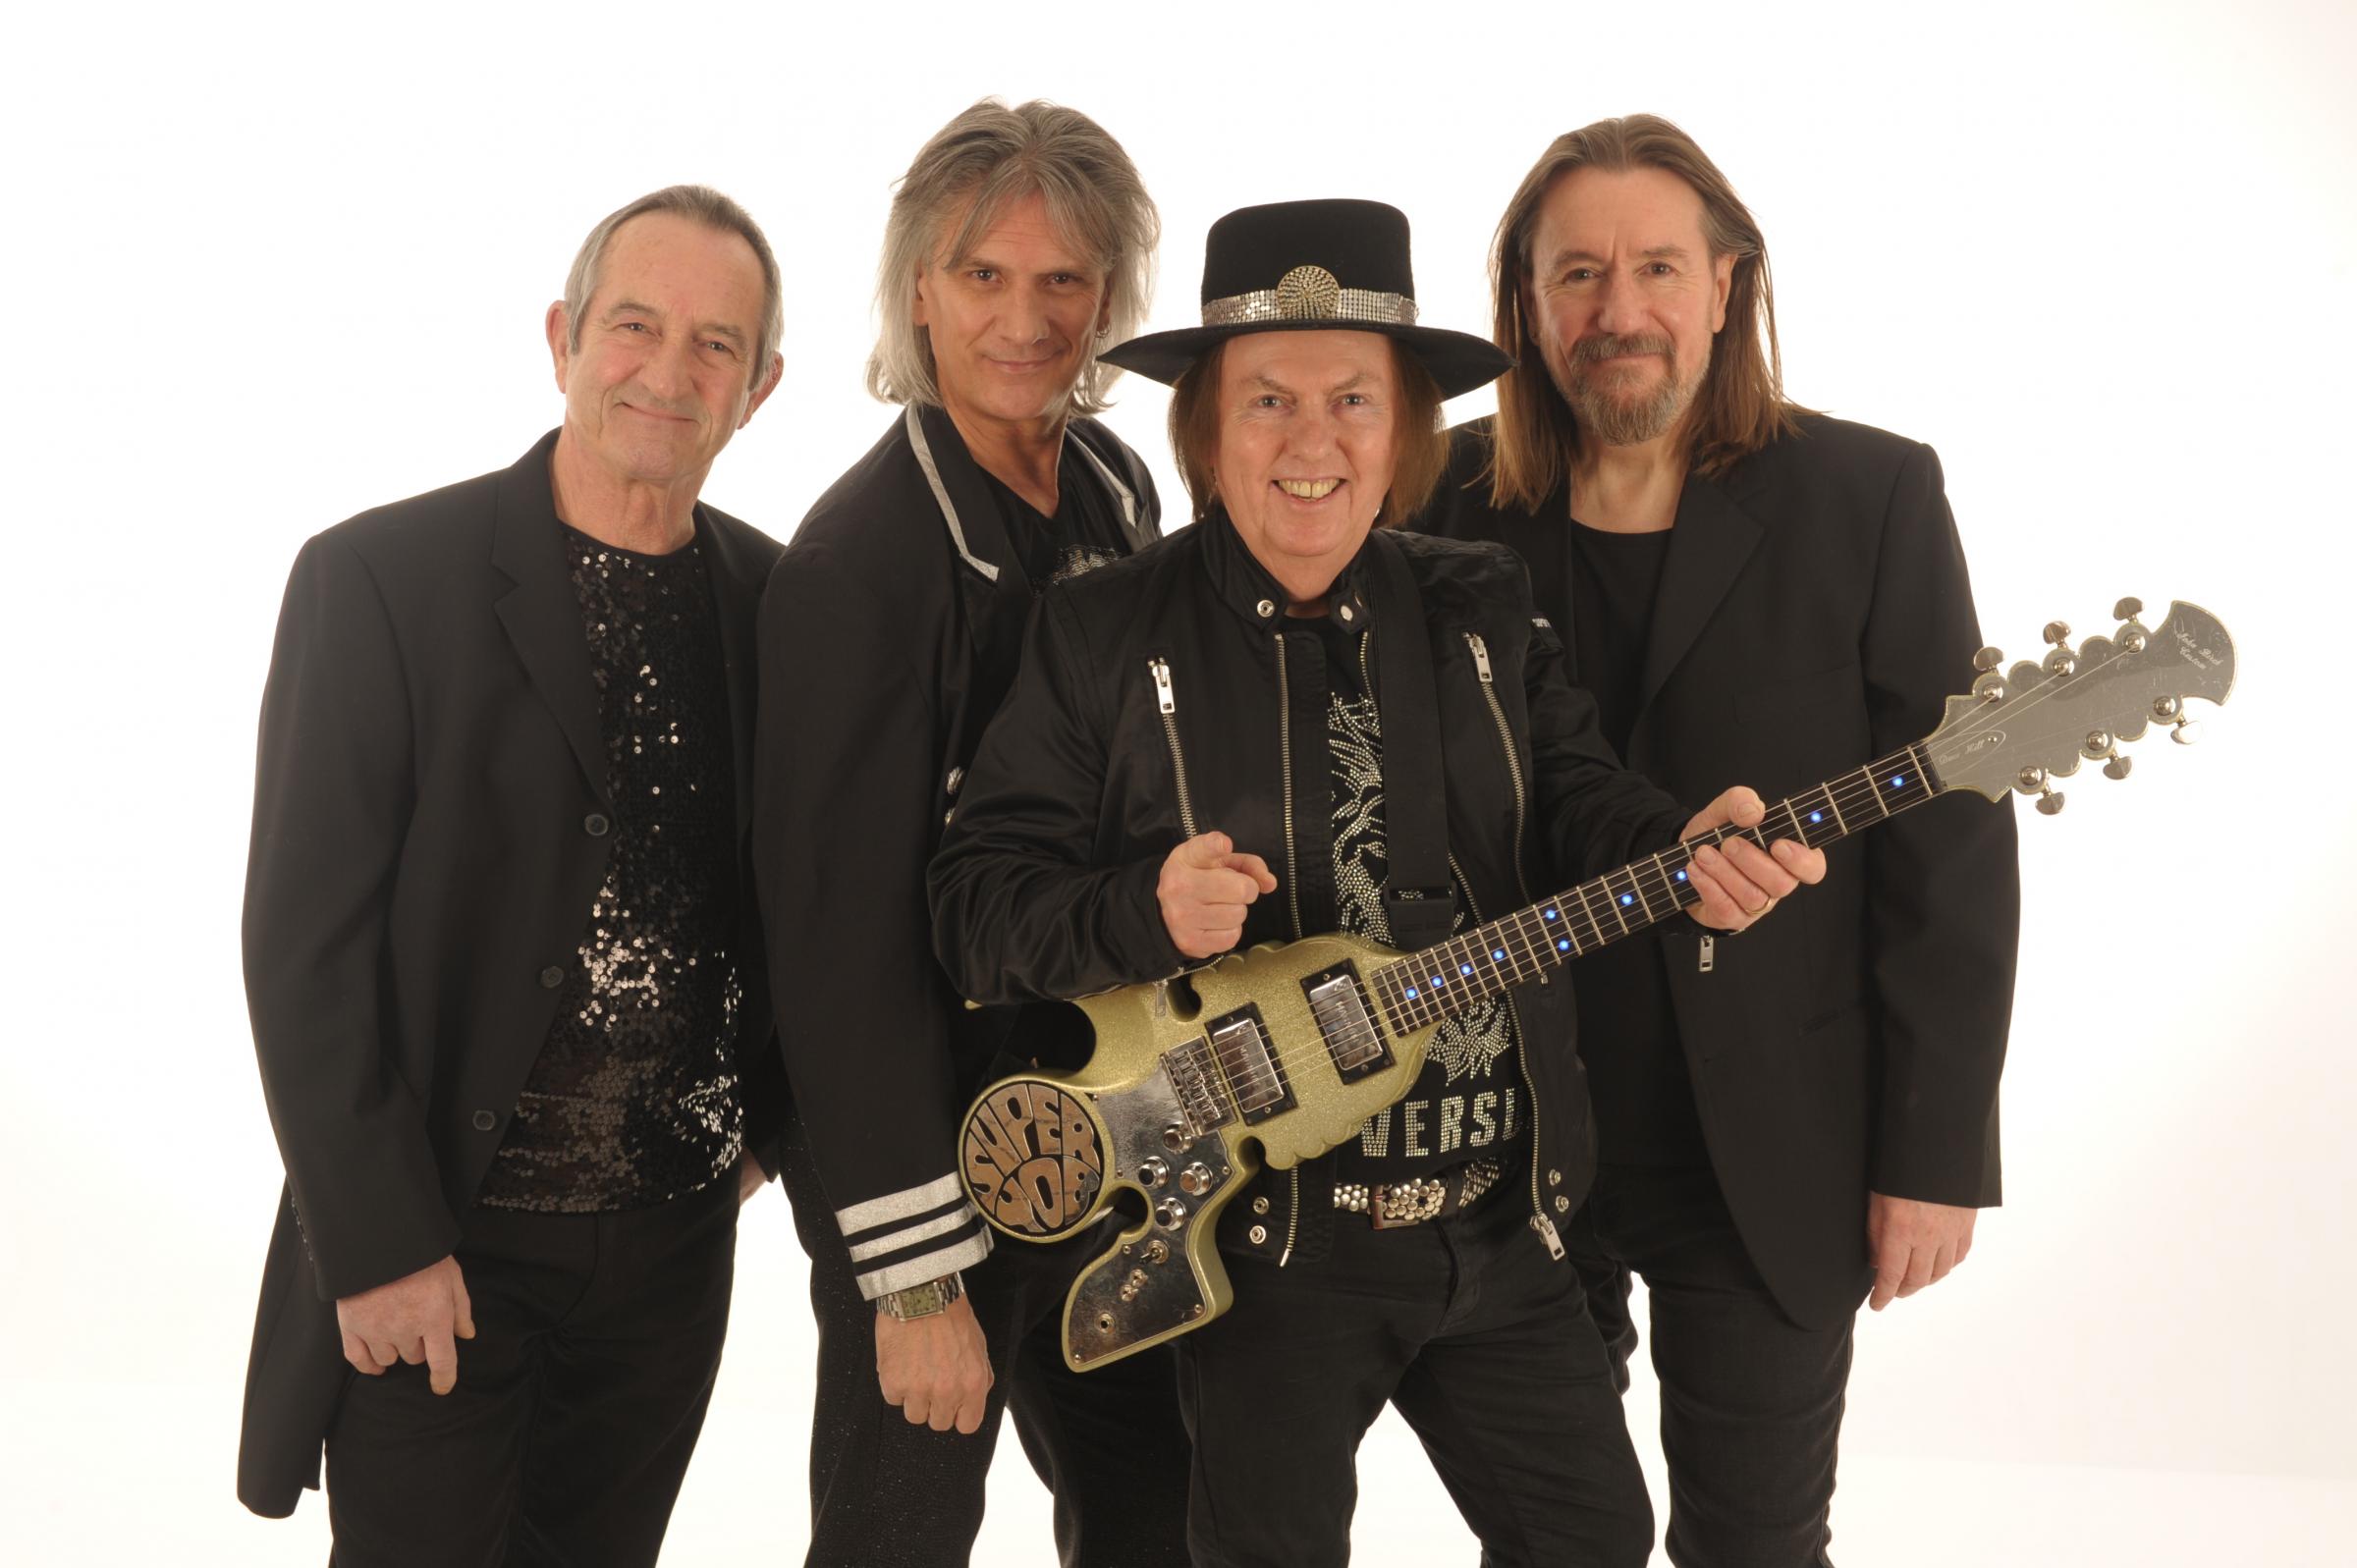 ON TOUR: Dave Hill and the current Slade line-up